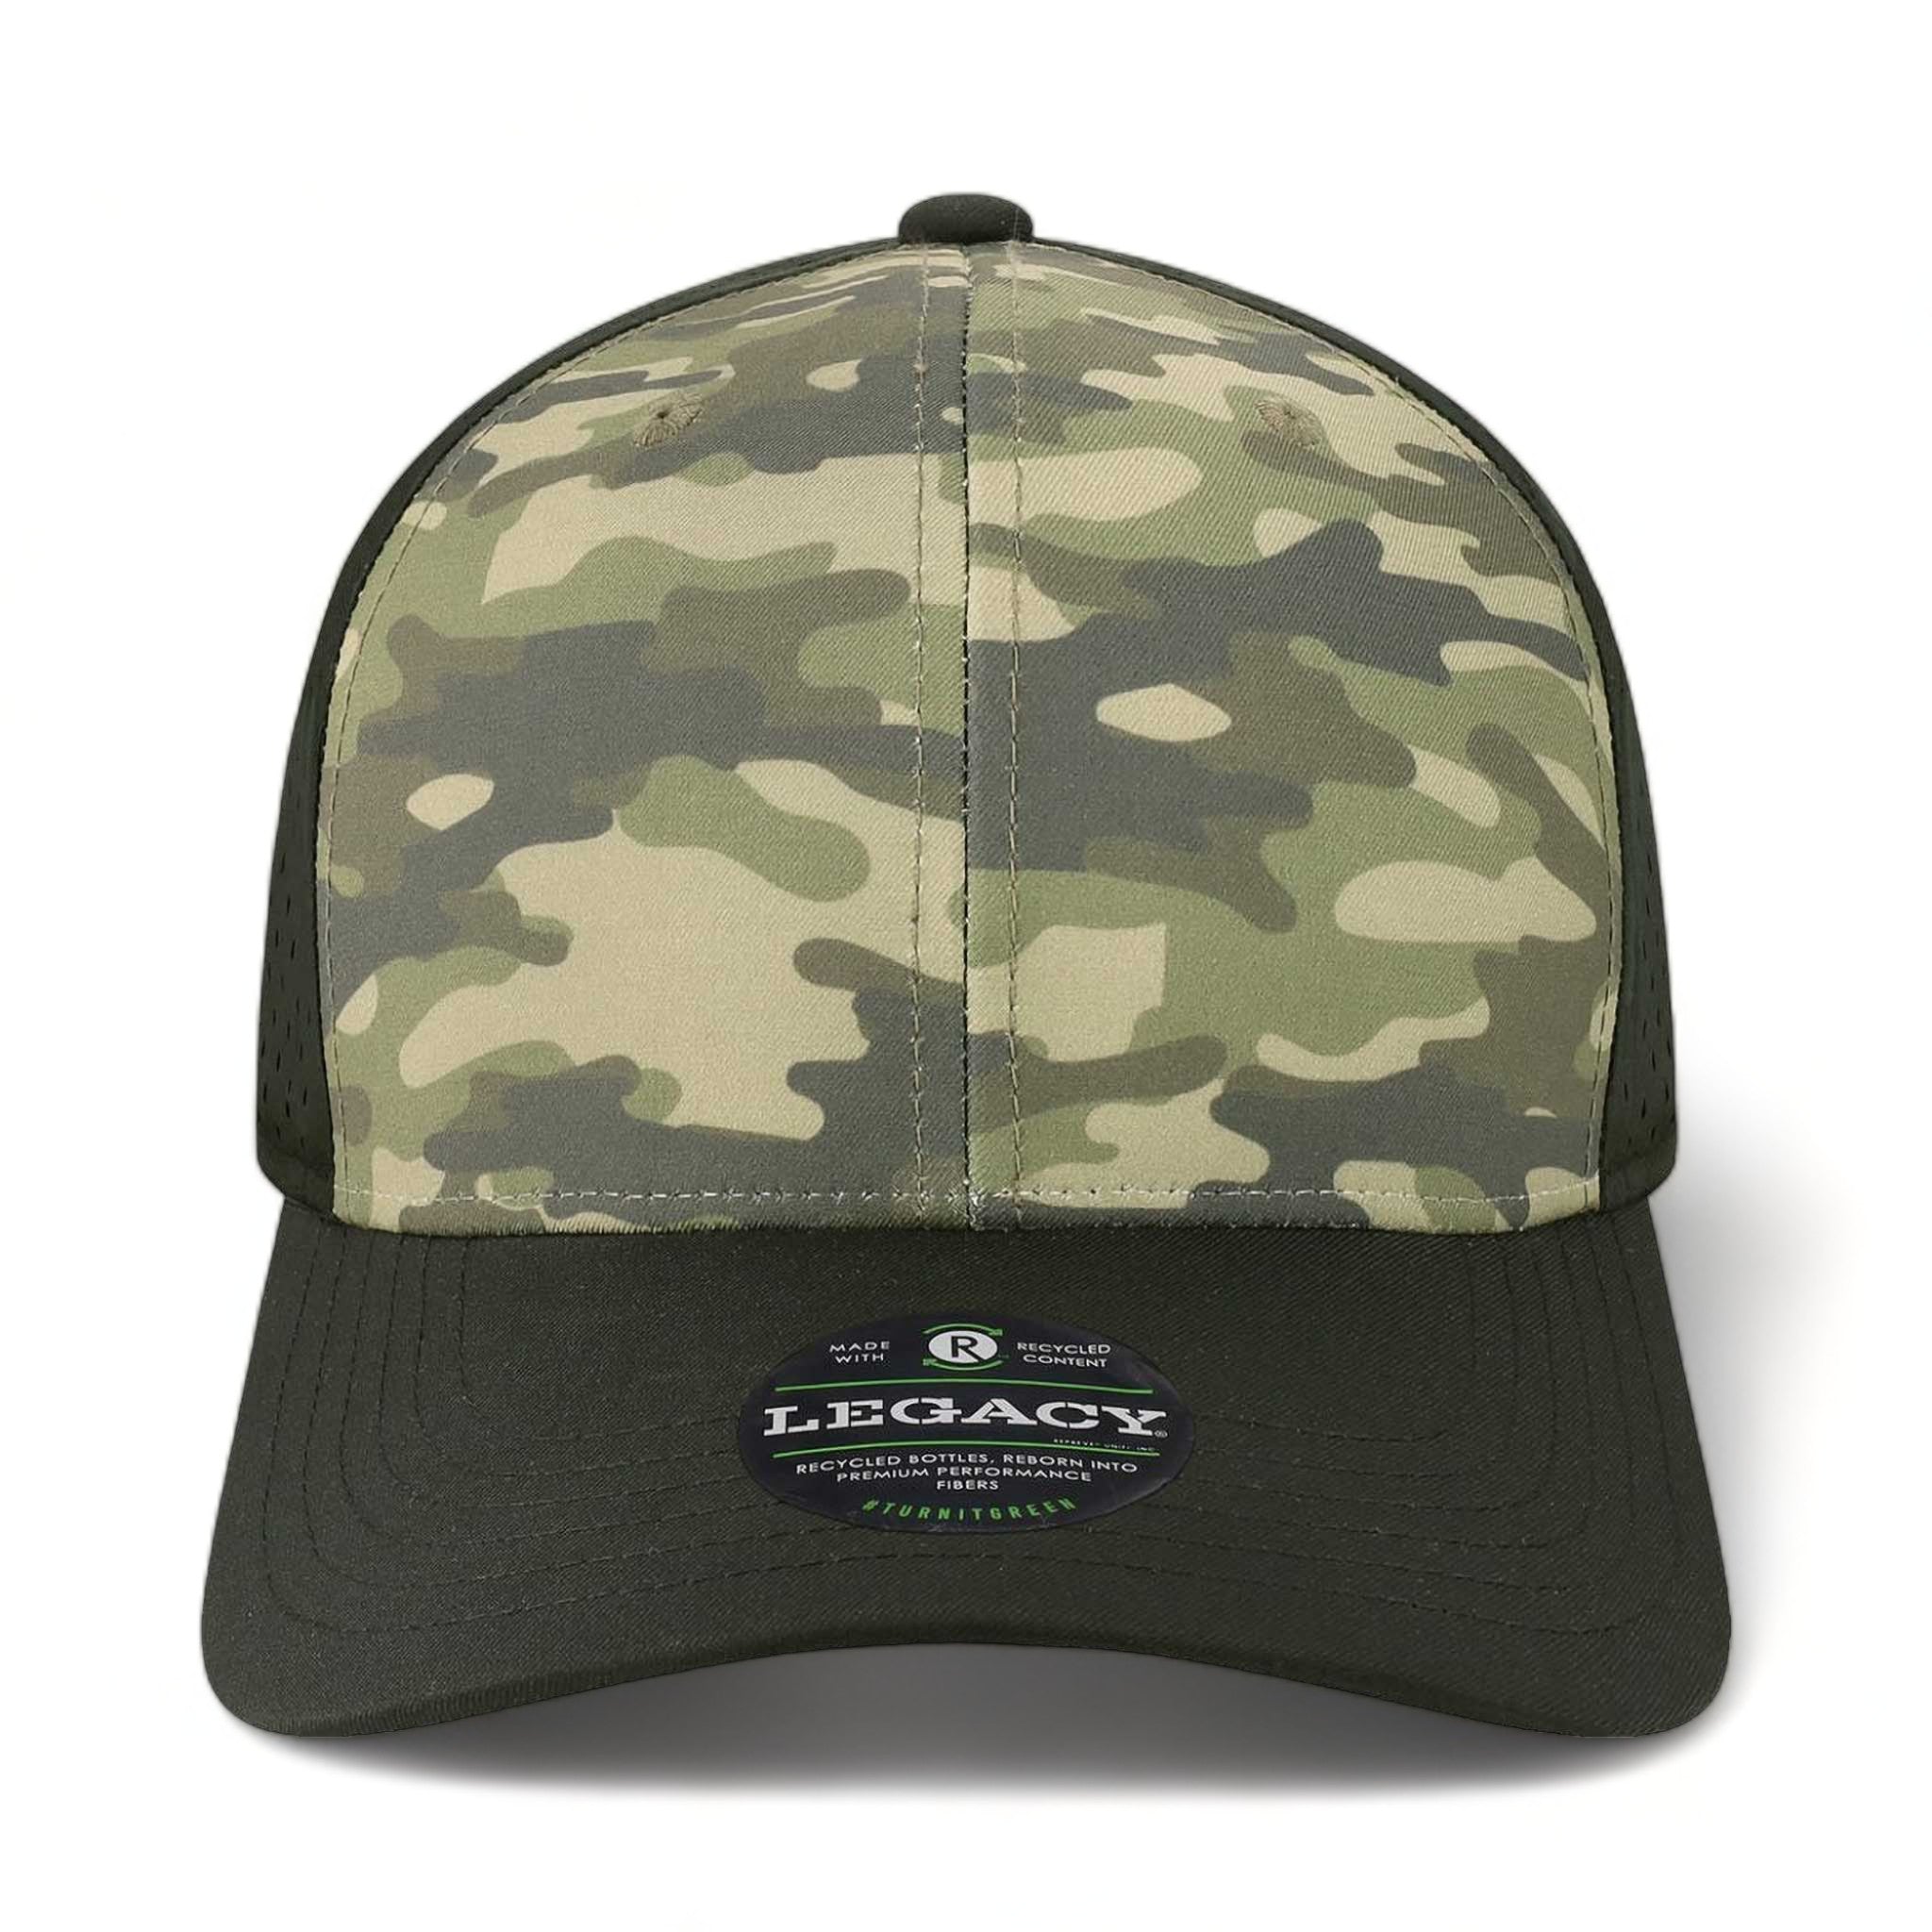 Front view of LEGACY REMPA custom hat in dark olive green camo and black